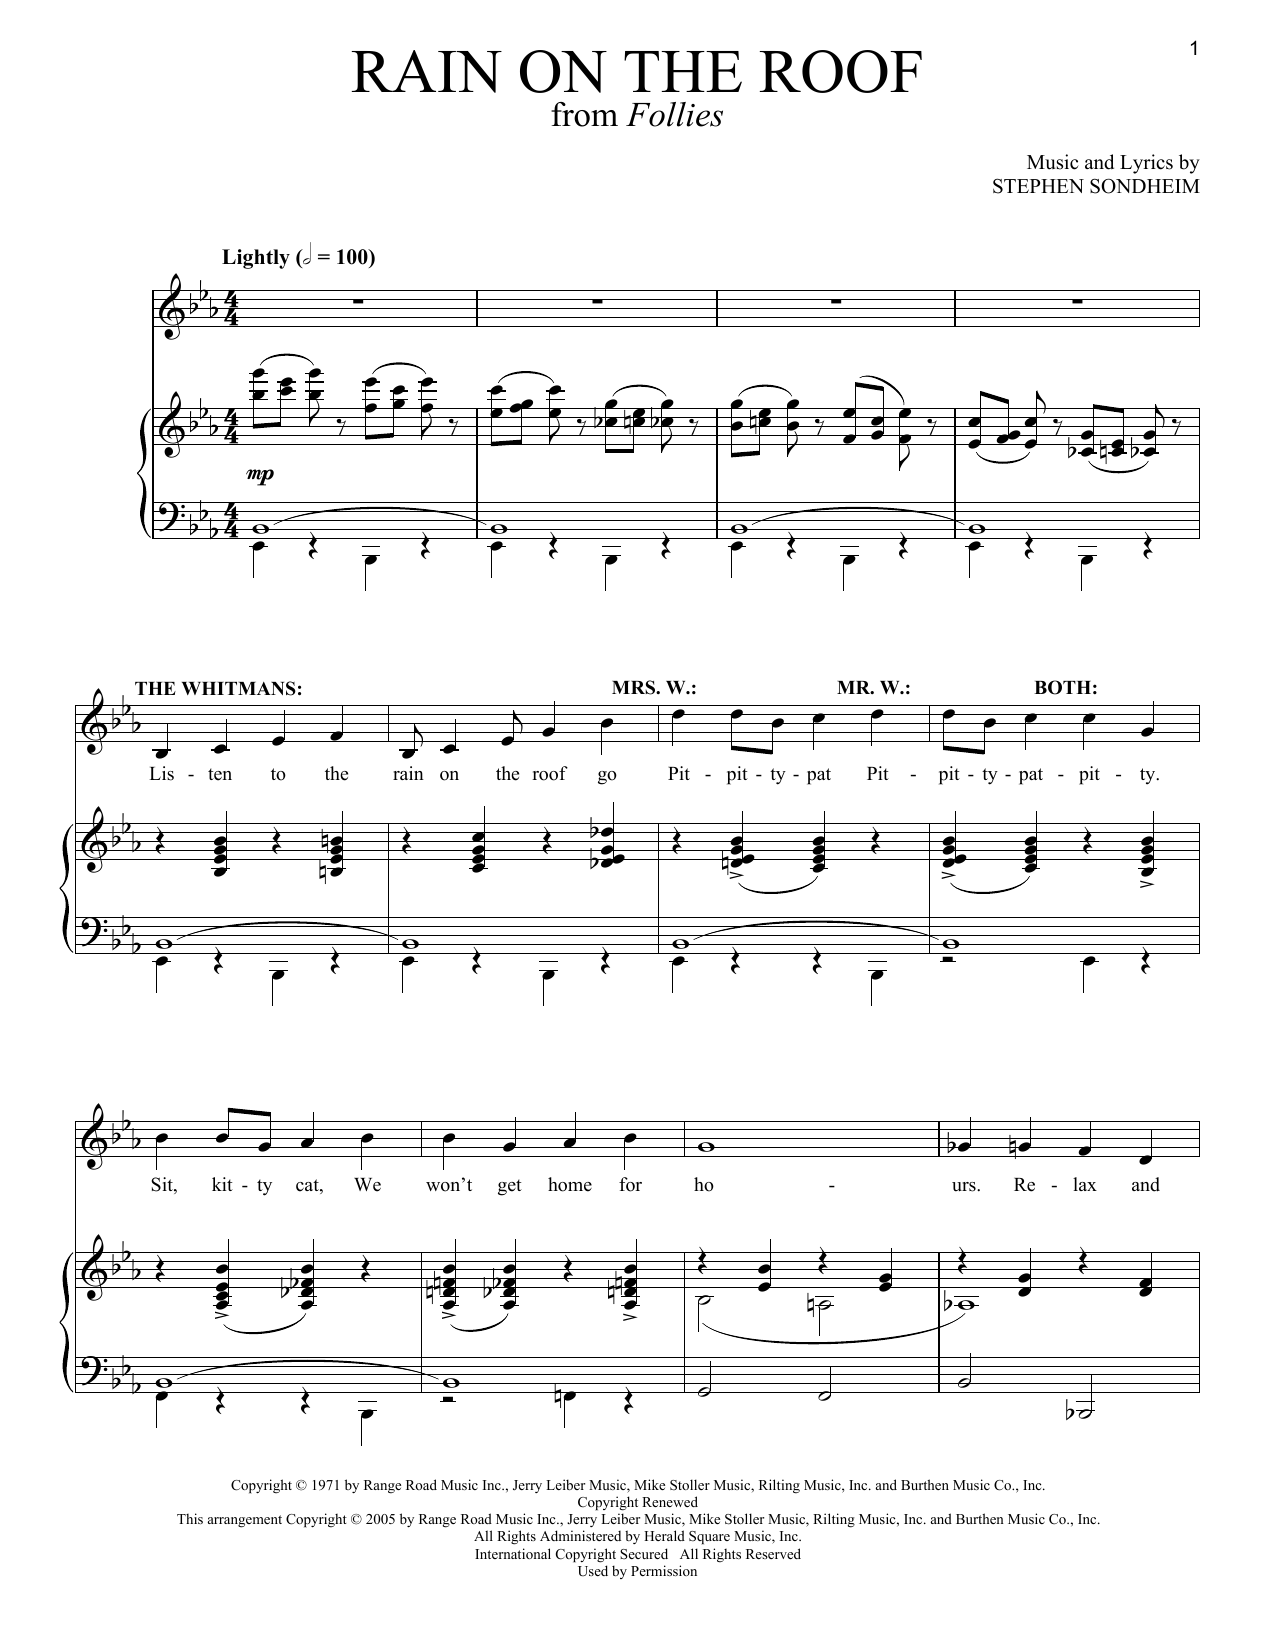 Stephen Sondheim Rain On The Roof (from Follies) sheet music notes and chords. Download Printable PDF.